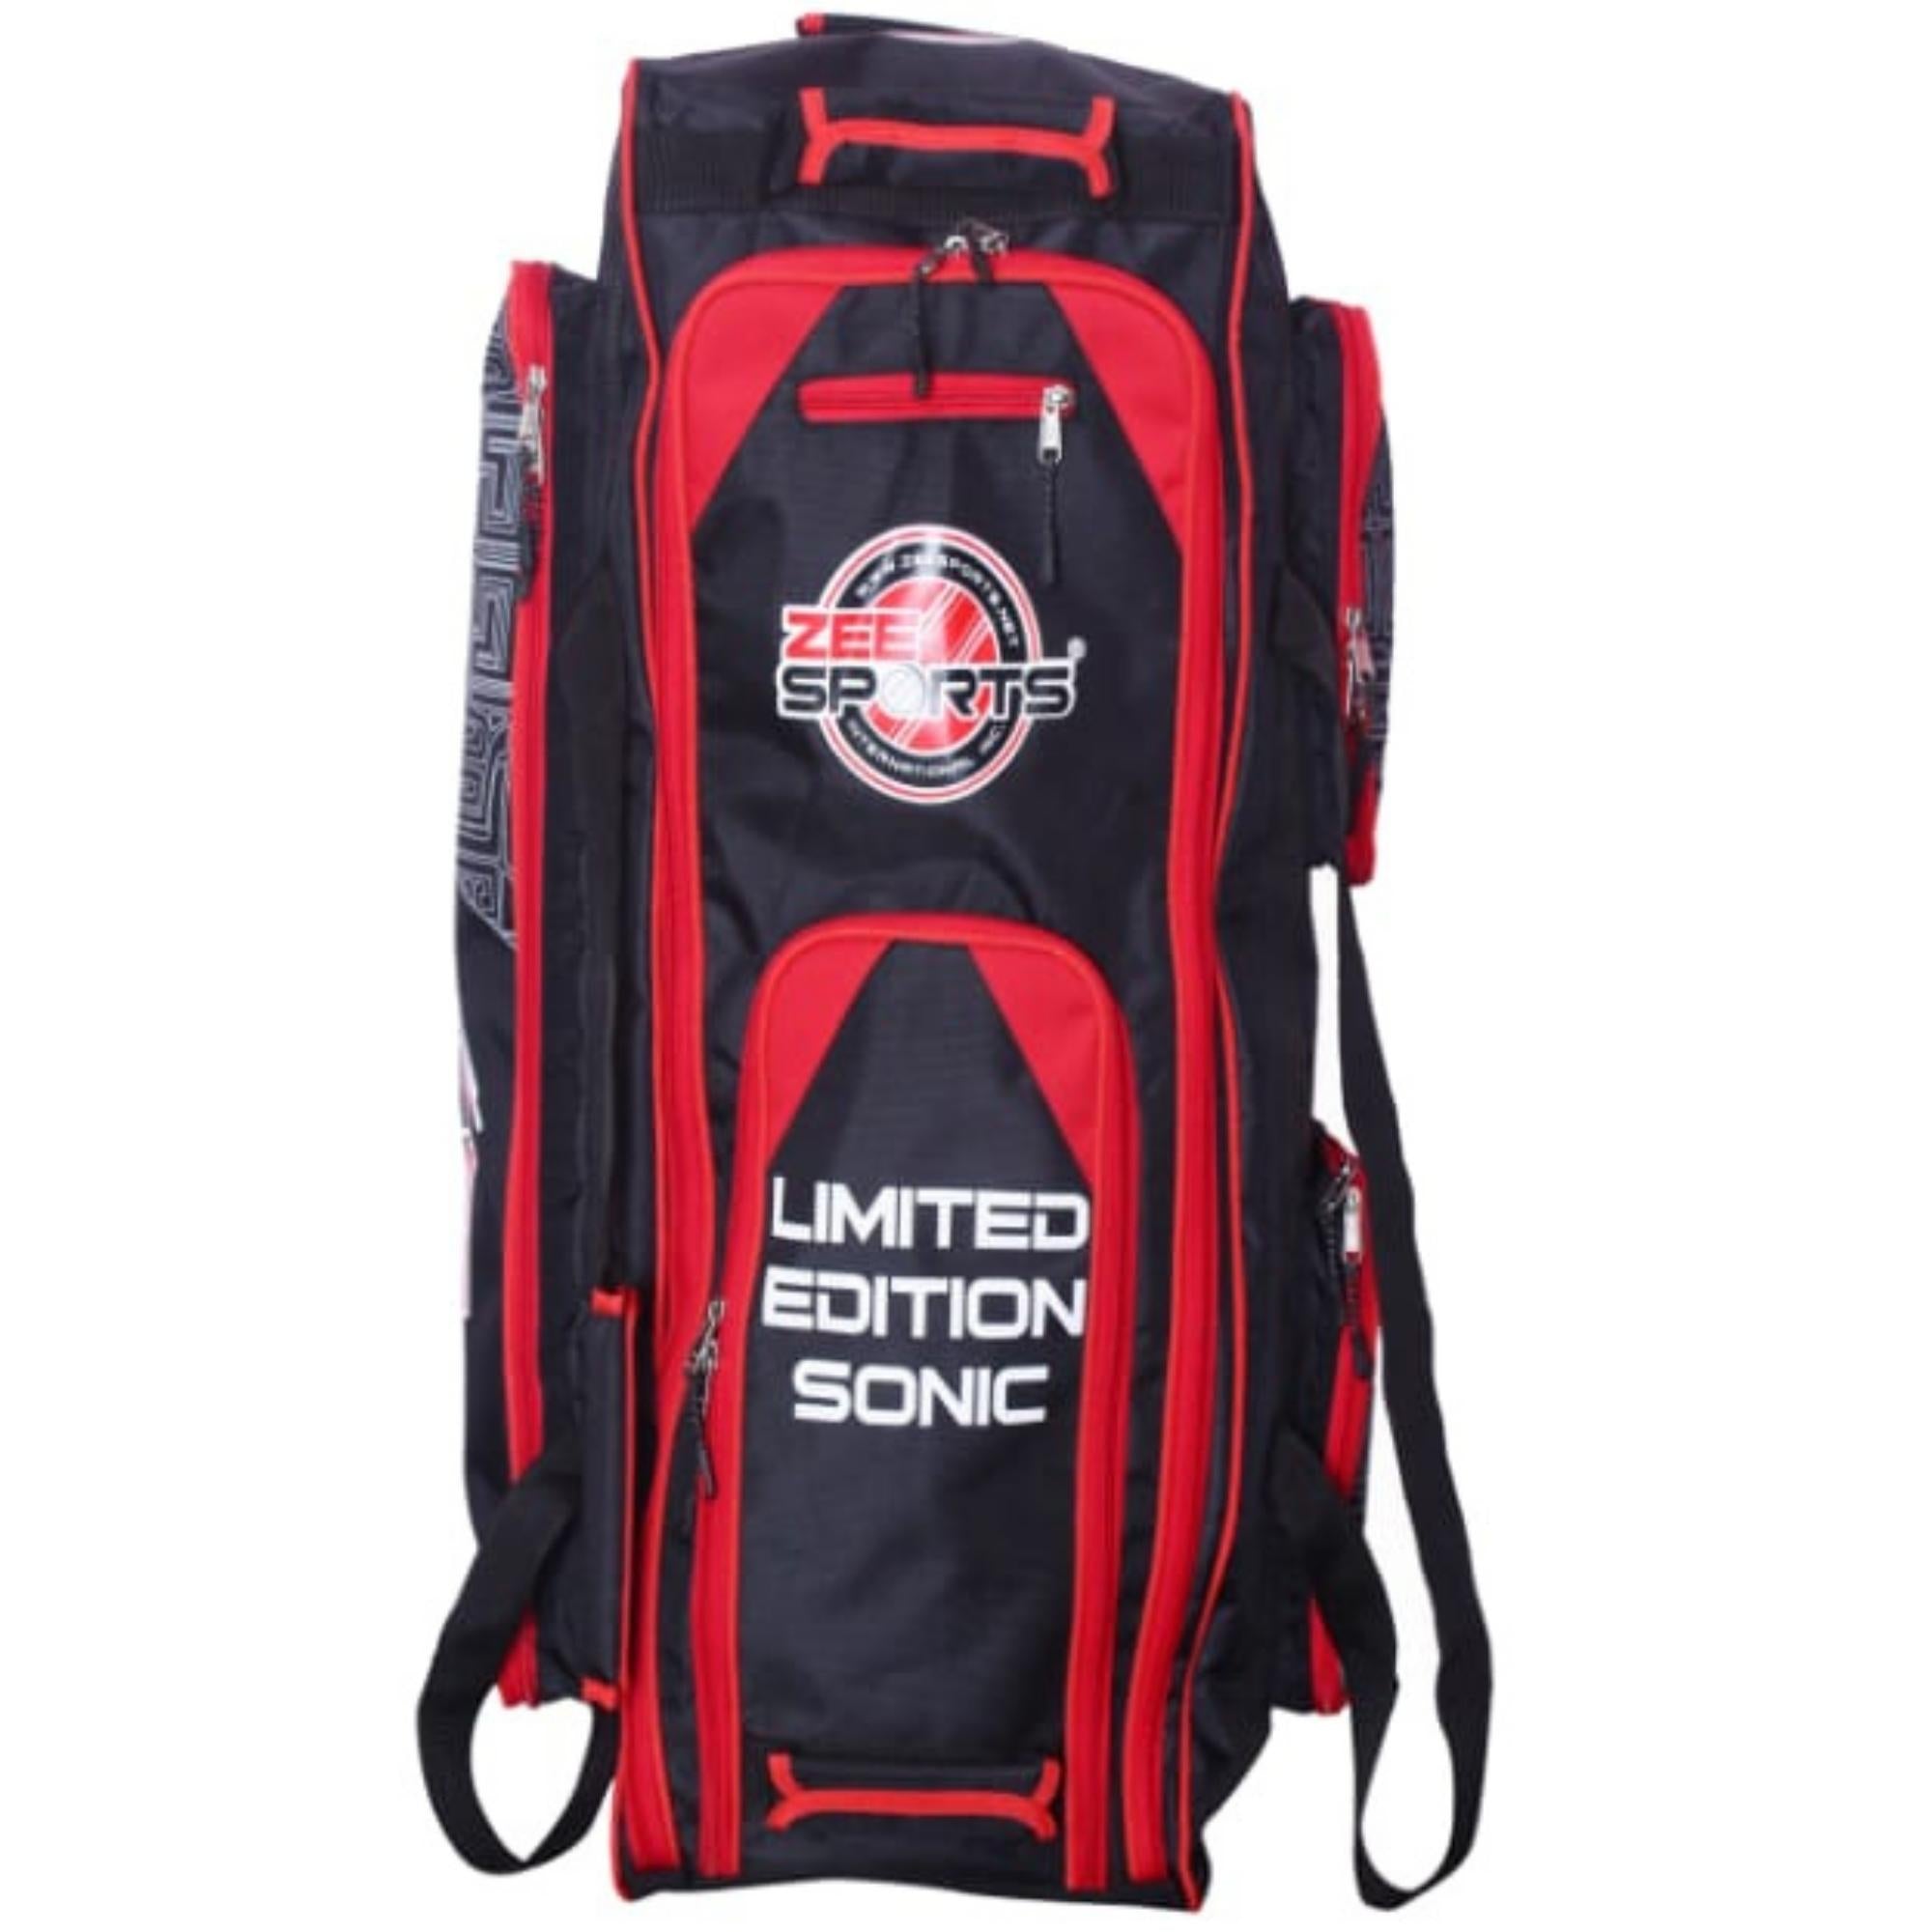 Zee Sports Kit Bag Limited Edition Sonic Black & Red